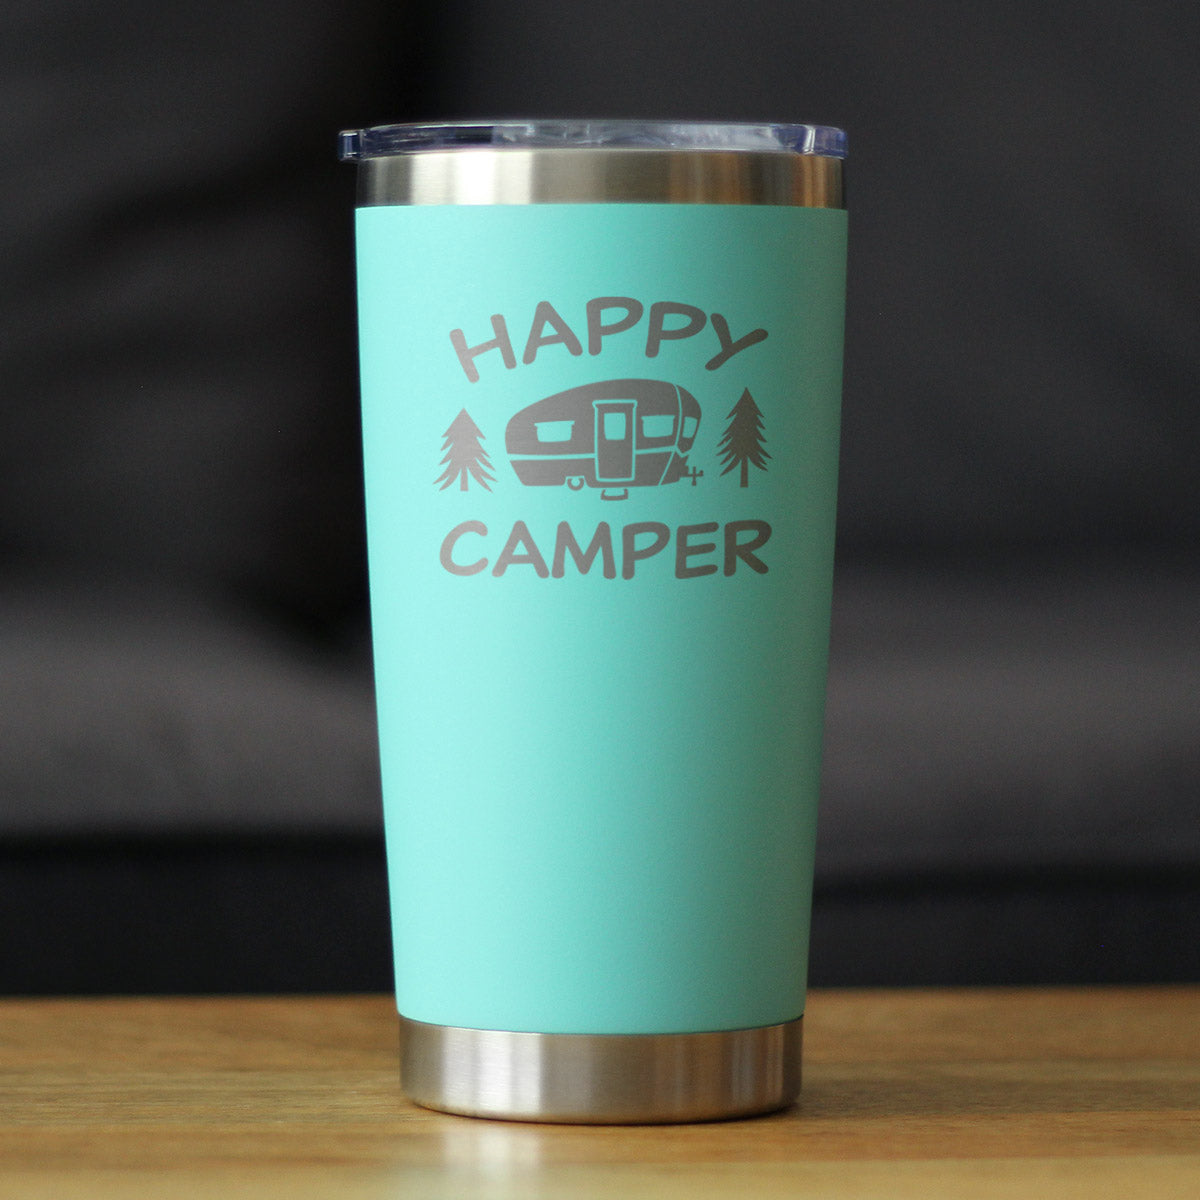 Happy Camper - Insulated Coffee Tumbler Cup with Sliding Lid - Stainless Steel Insulated Mug - Unique Outdoor Camping Tumbler